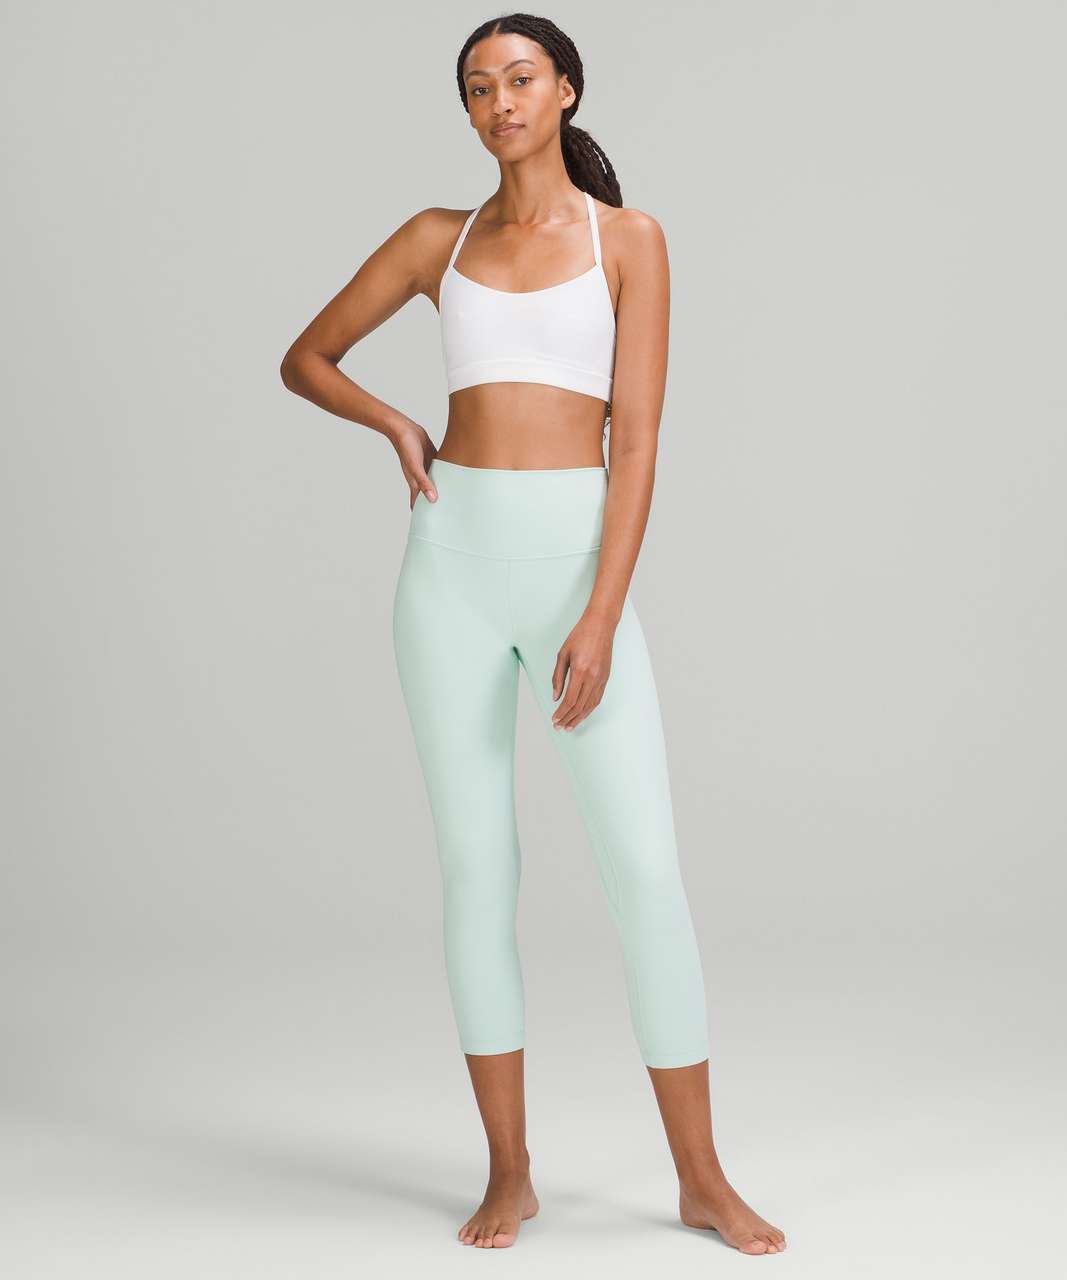 Delicate mint align pant to complete my collection 💚 : r/lululemon